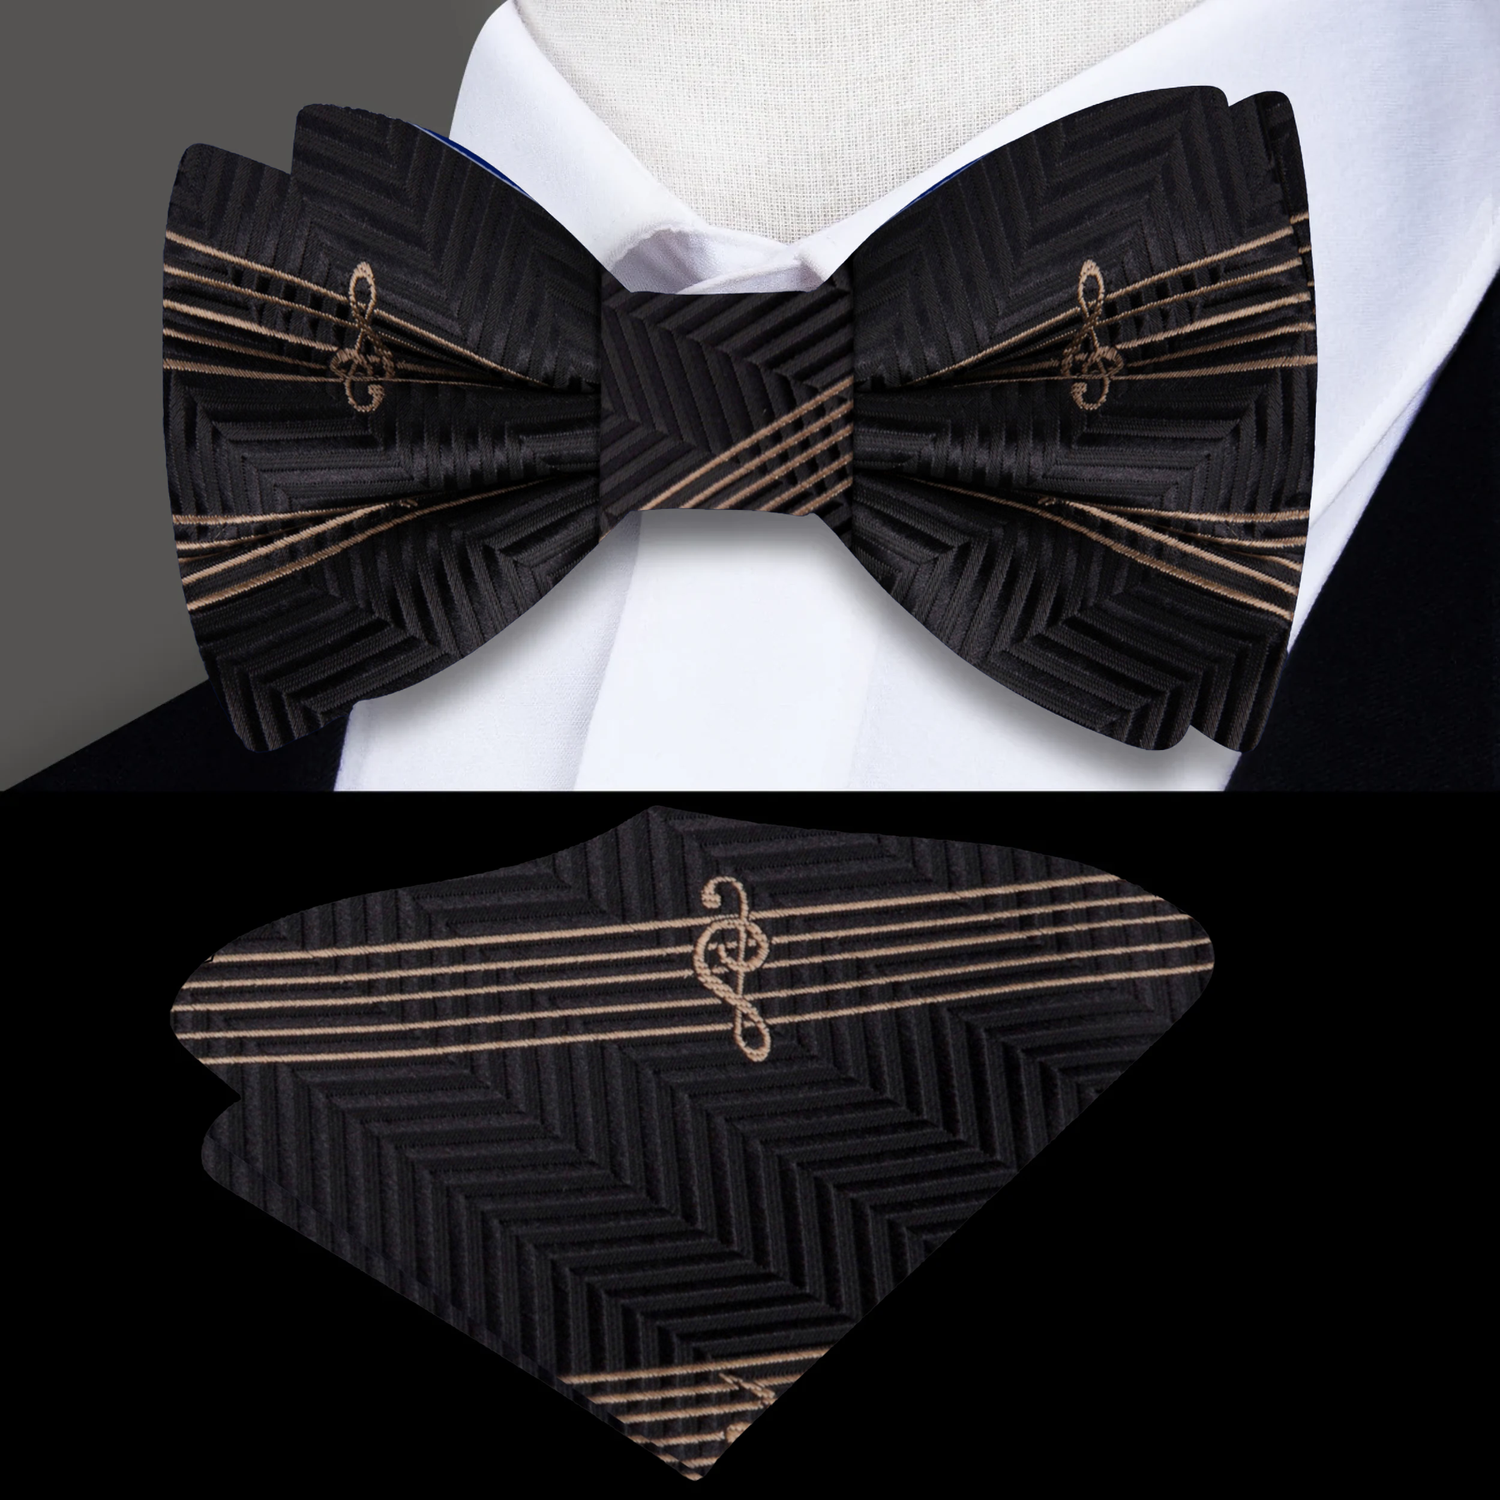 Black, Gold Printed Music Bow Tie ad Square